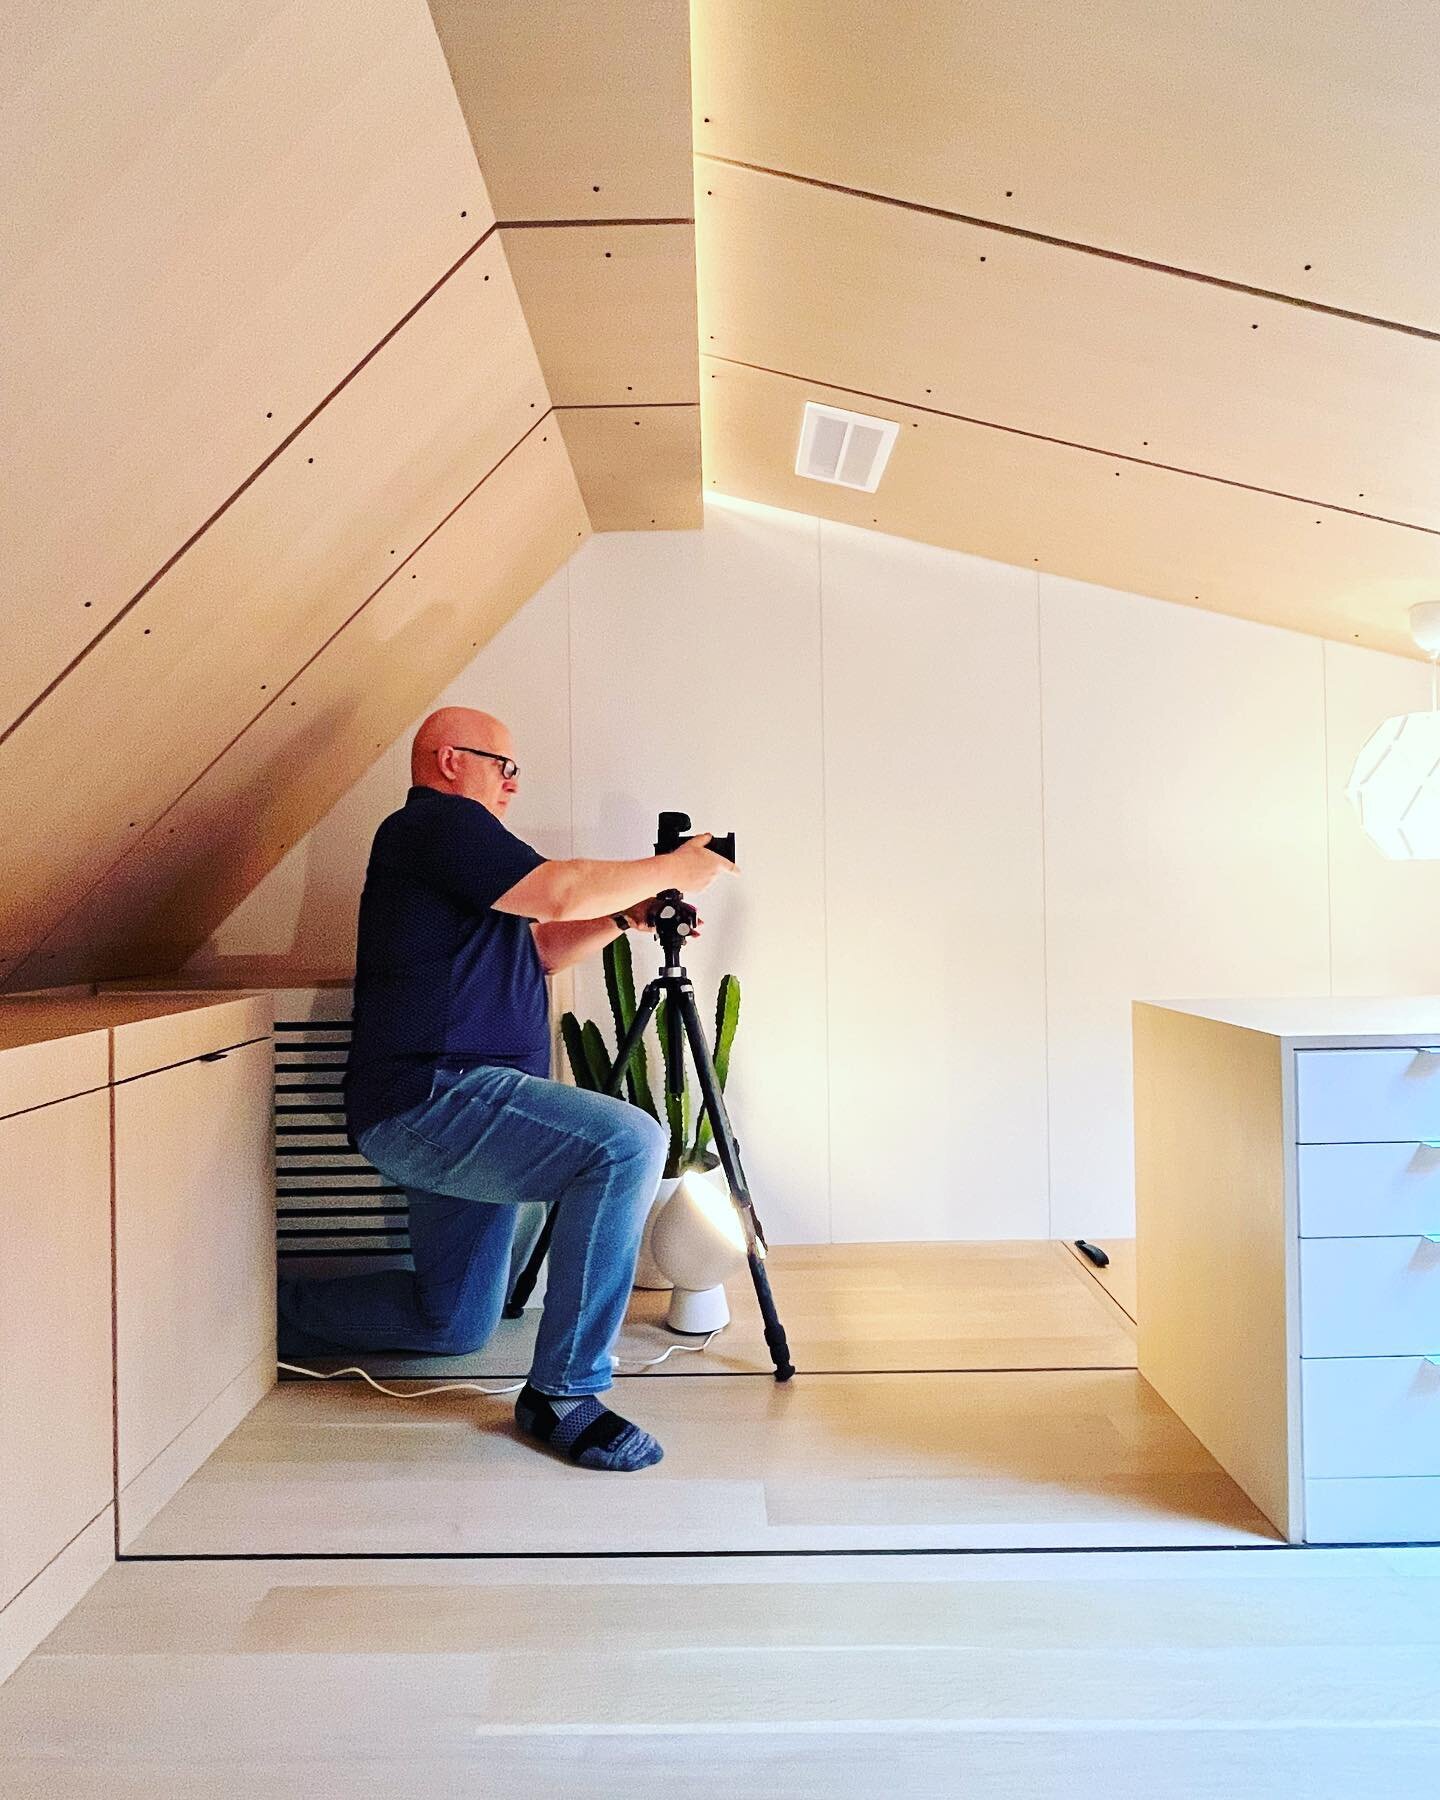 Photoshoot day in Cleveland Park. Great work @todconnellphotography 

#reformarch_llc, #modernliving, #modernrenovations, #smallspaces